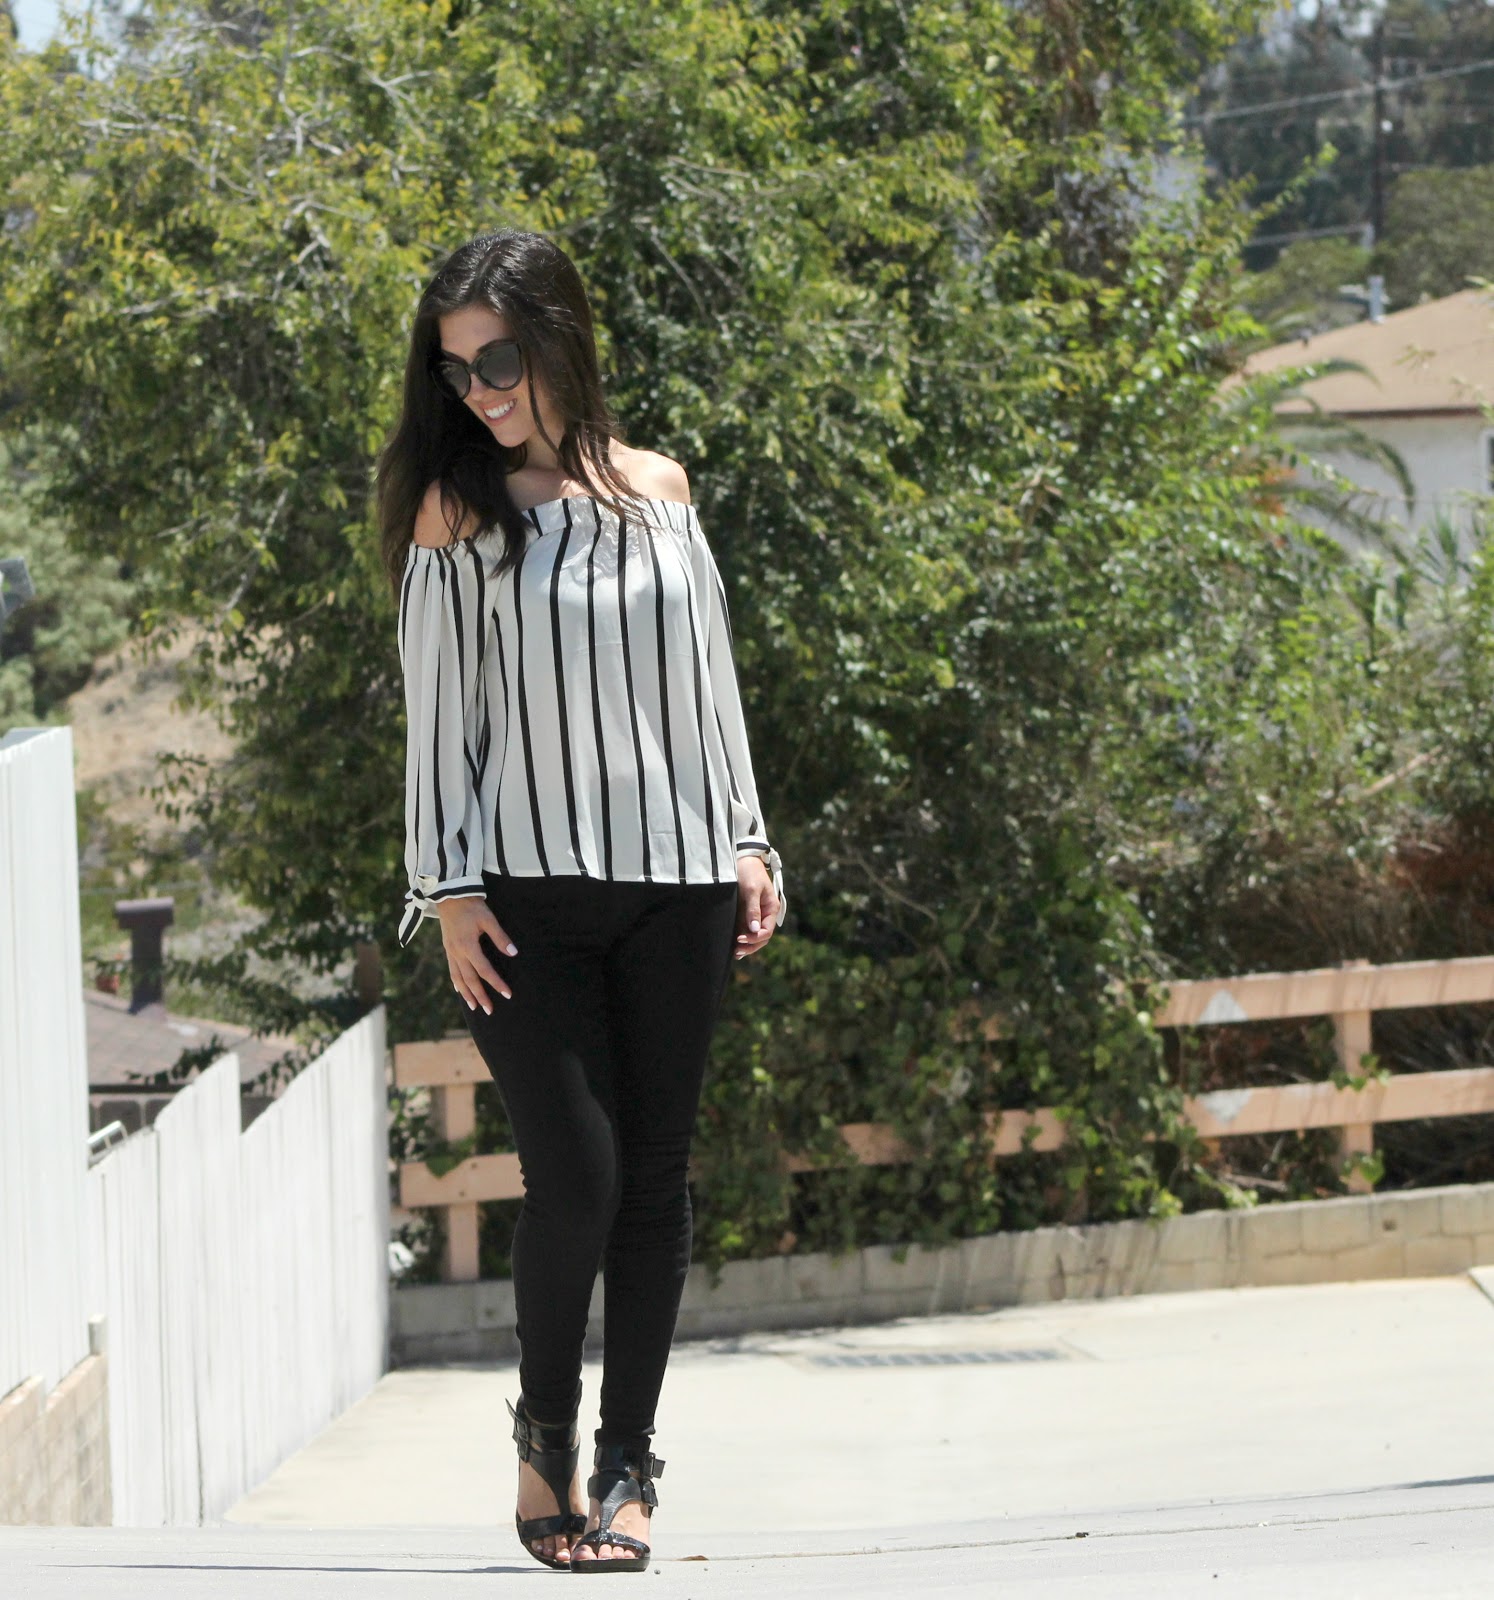 Beautifully Candid: Off The Shoulder Tie Sleeve Look From Summer to Fall